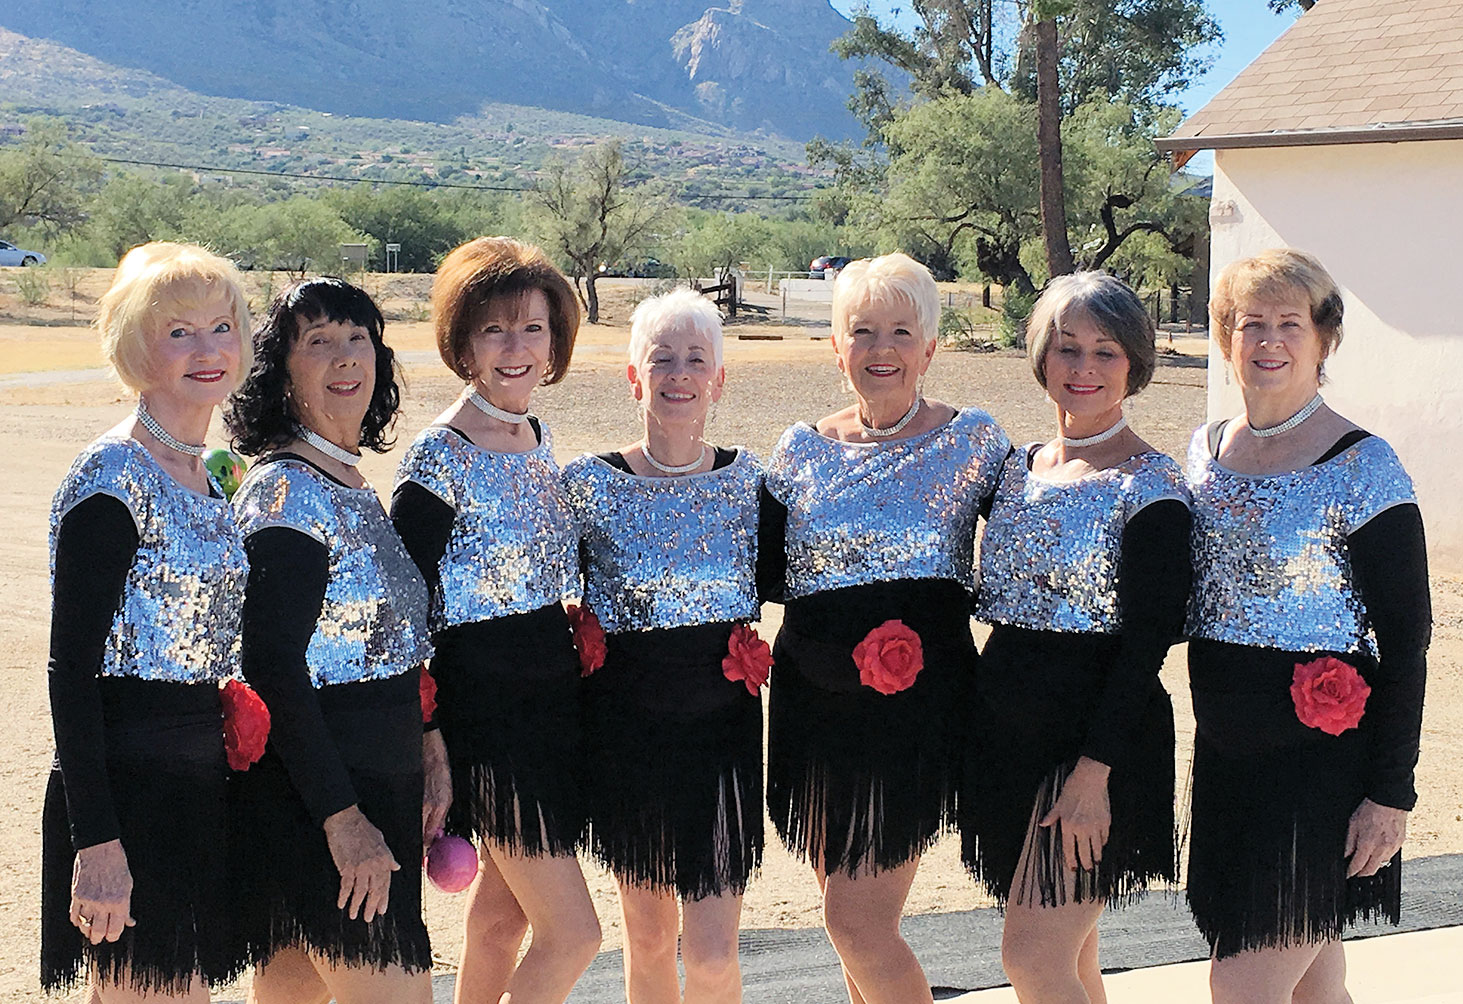 Dancers, left to right: Linda Schuttler, Caryl Mobley, Ann Kurtz, Vivian Herman, Claudia Booth, Kathleen Dunbar and Laurie Page